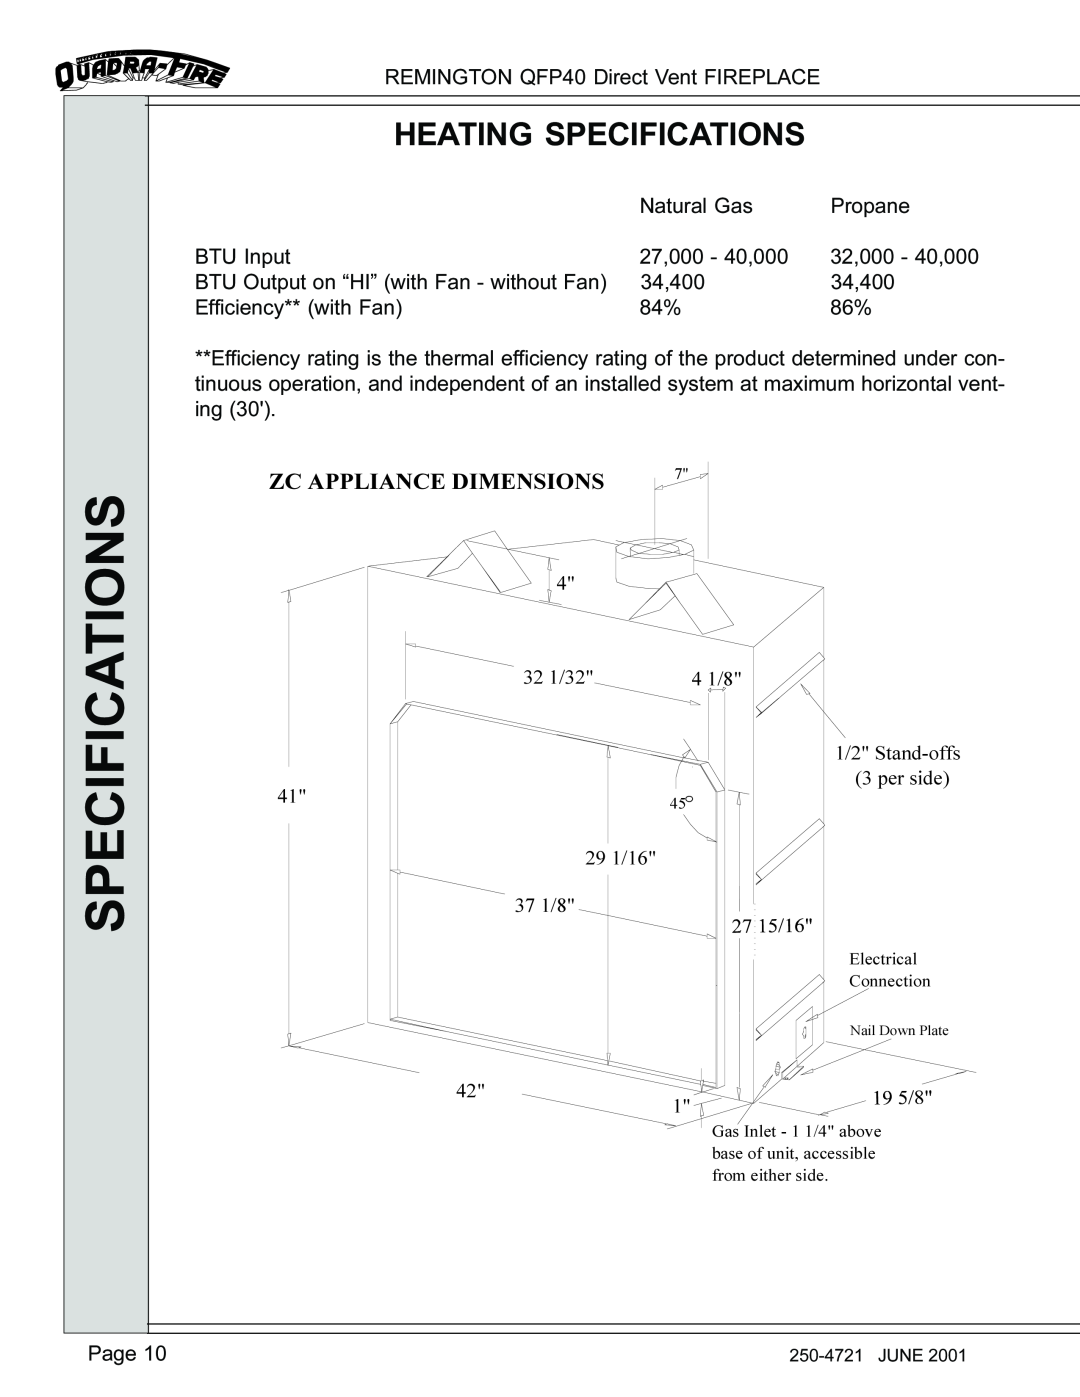 Remington QFP40 manual Heating Specifications, Zc Appliance Dimensions 